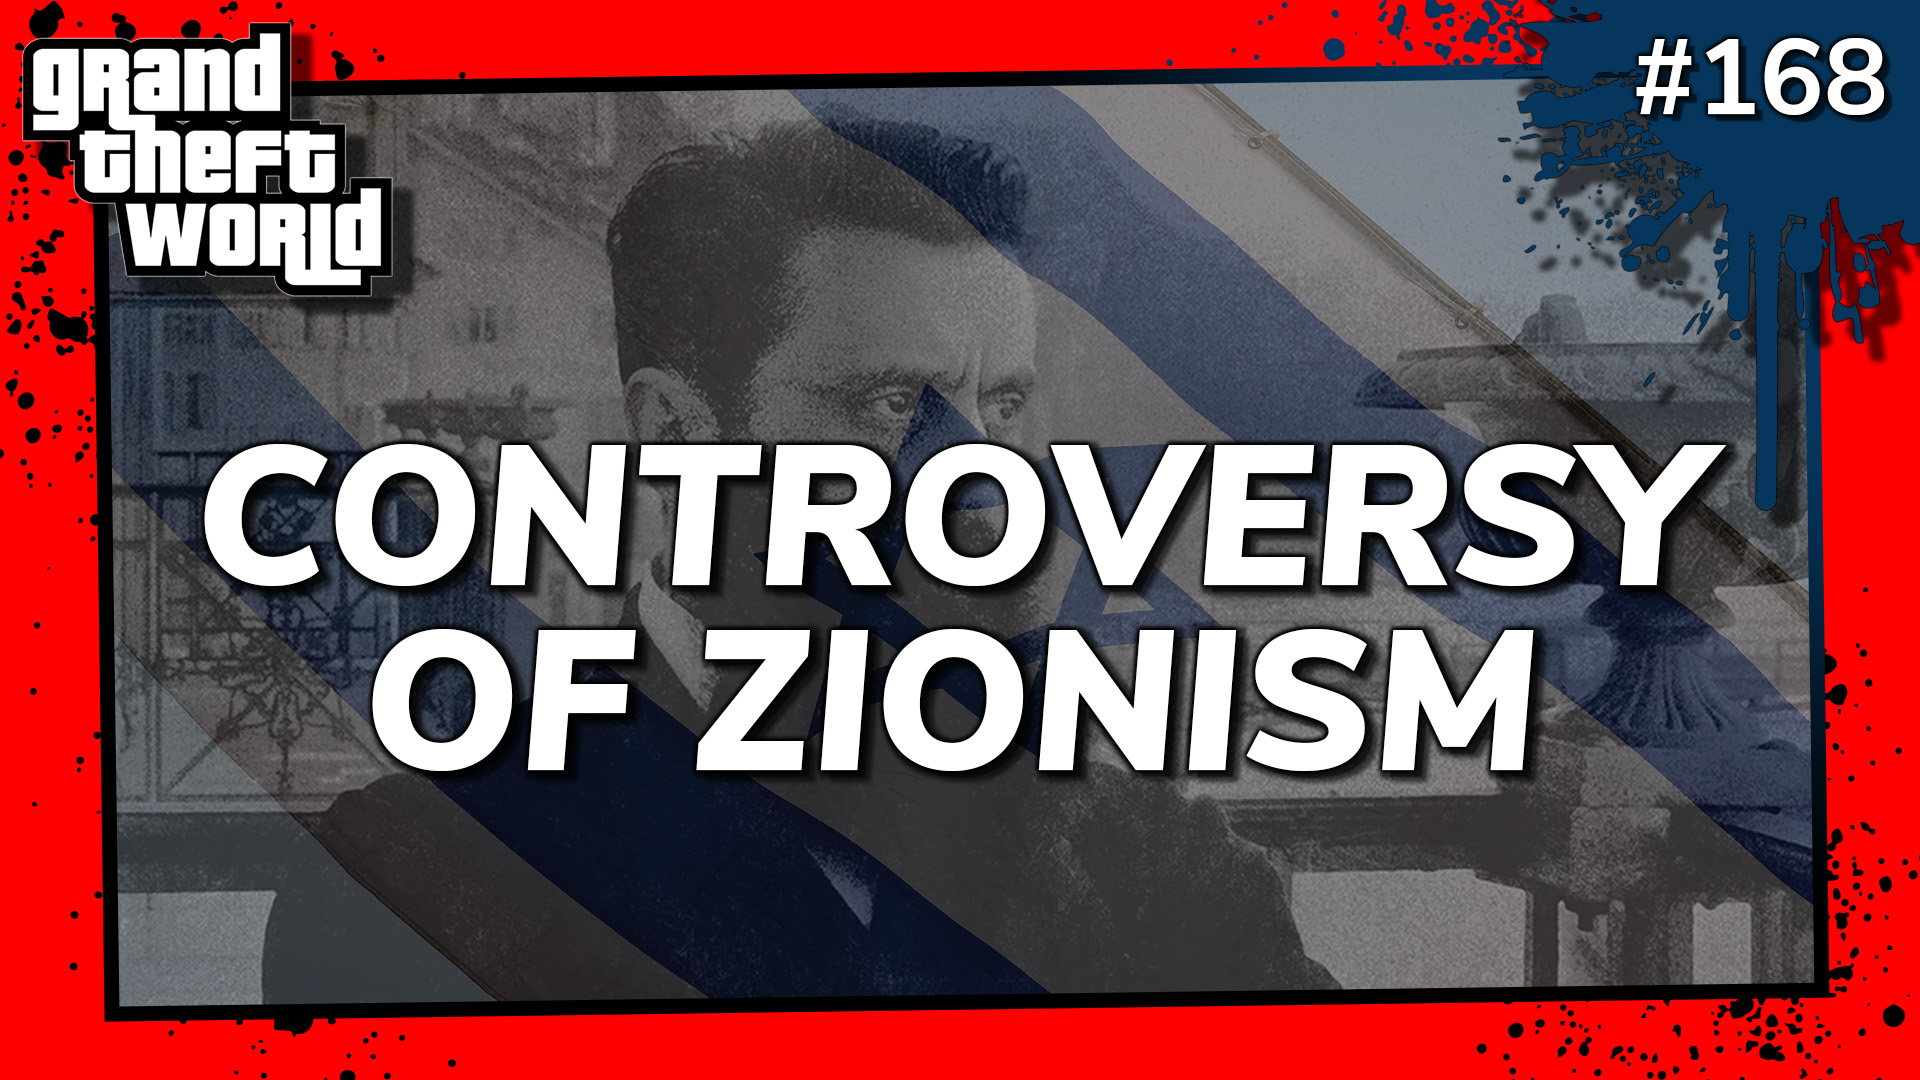 Grand Theft World Podcast 168 | CONTROVERSY OF ZIONISM